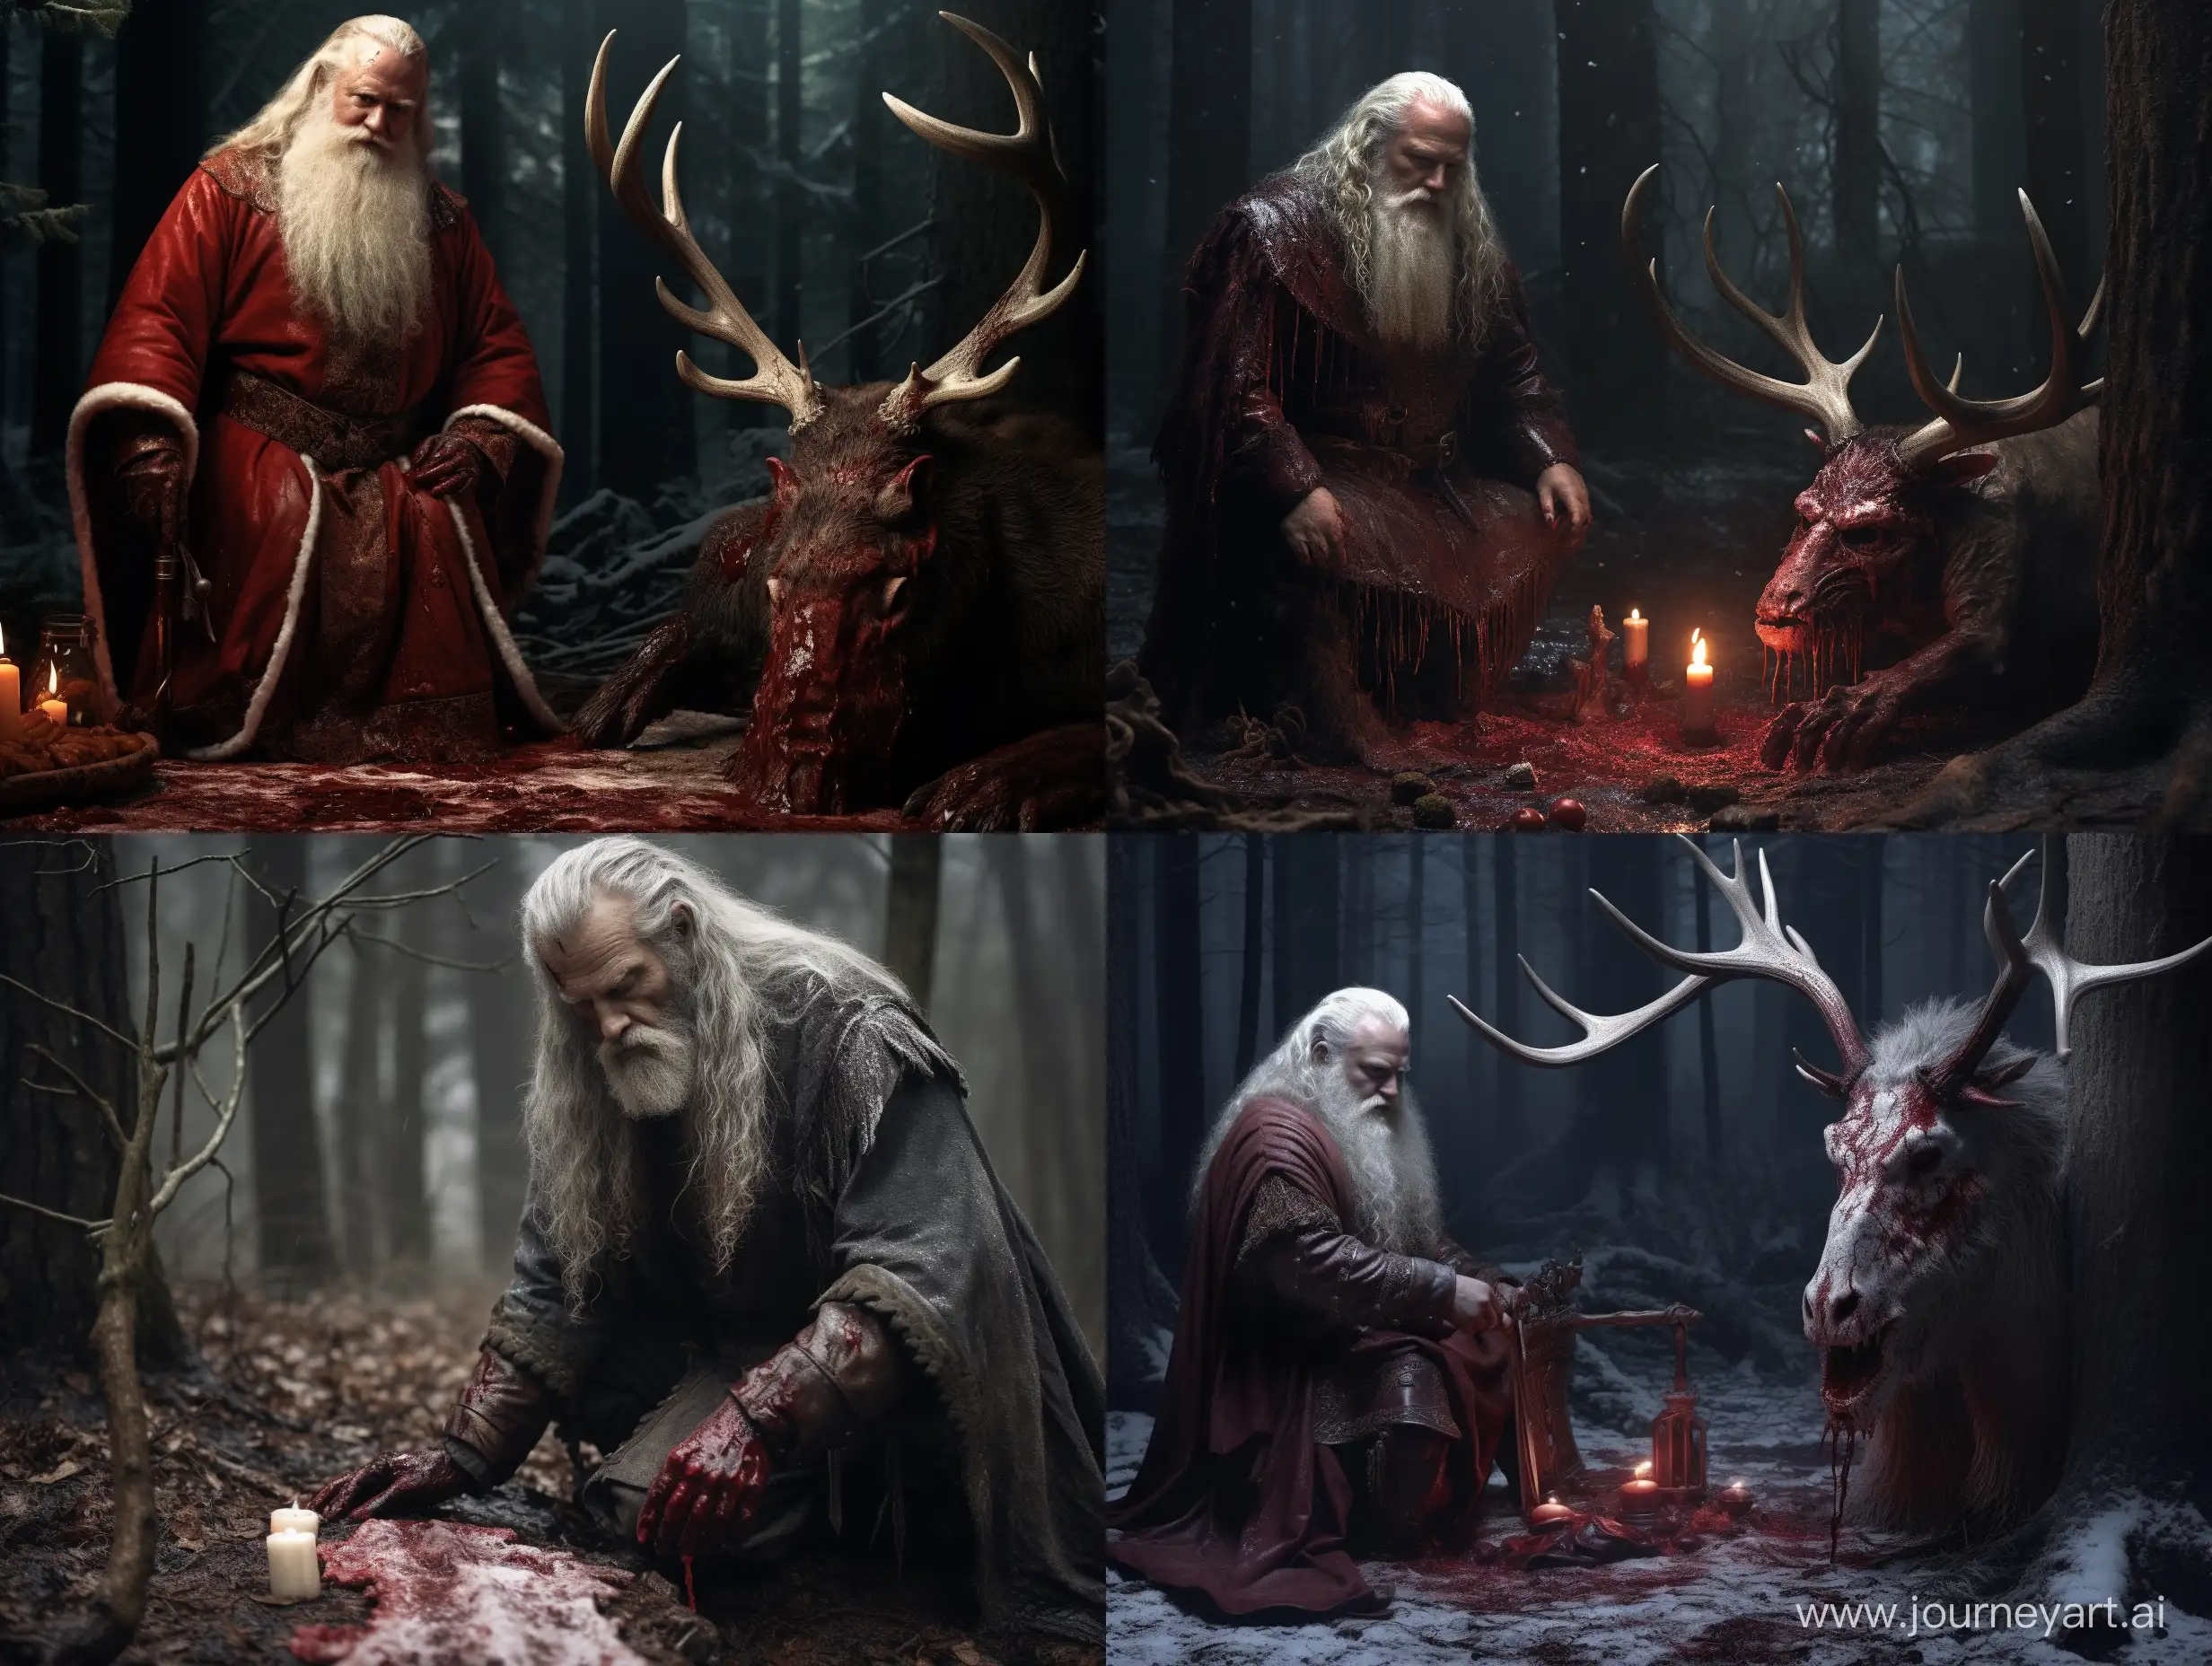 Bloodied-Santa-Viking-with-Looted-Gifts-in-Dark-Rainy-Forest